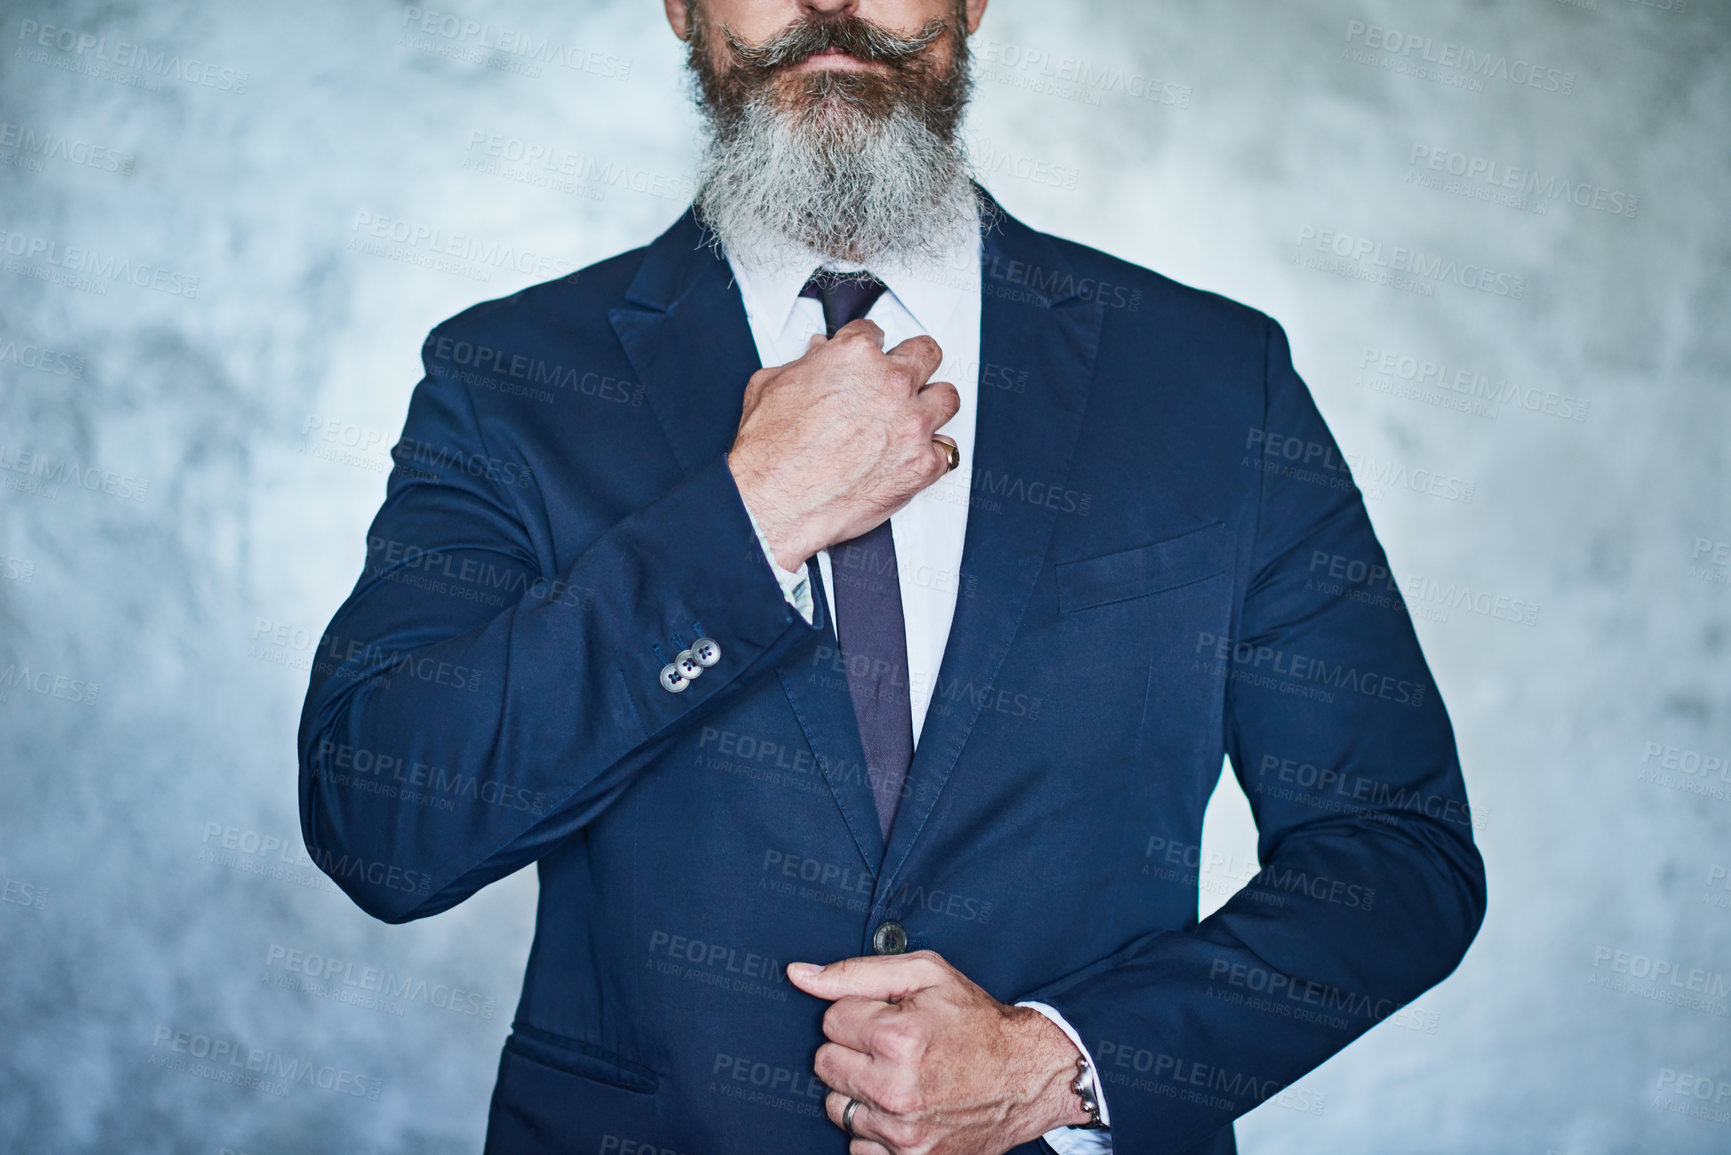 Buy stock photo Studio shot of a handsome middle aged businessman wearing a formal suit while standing against a grey background